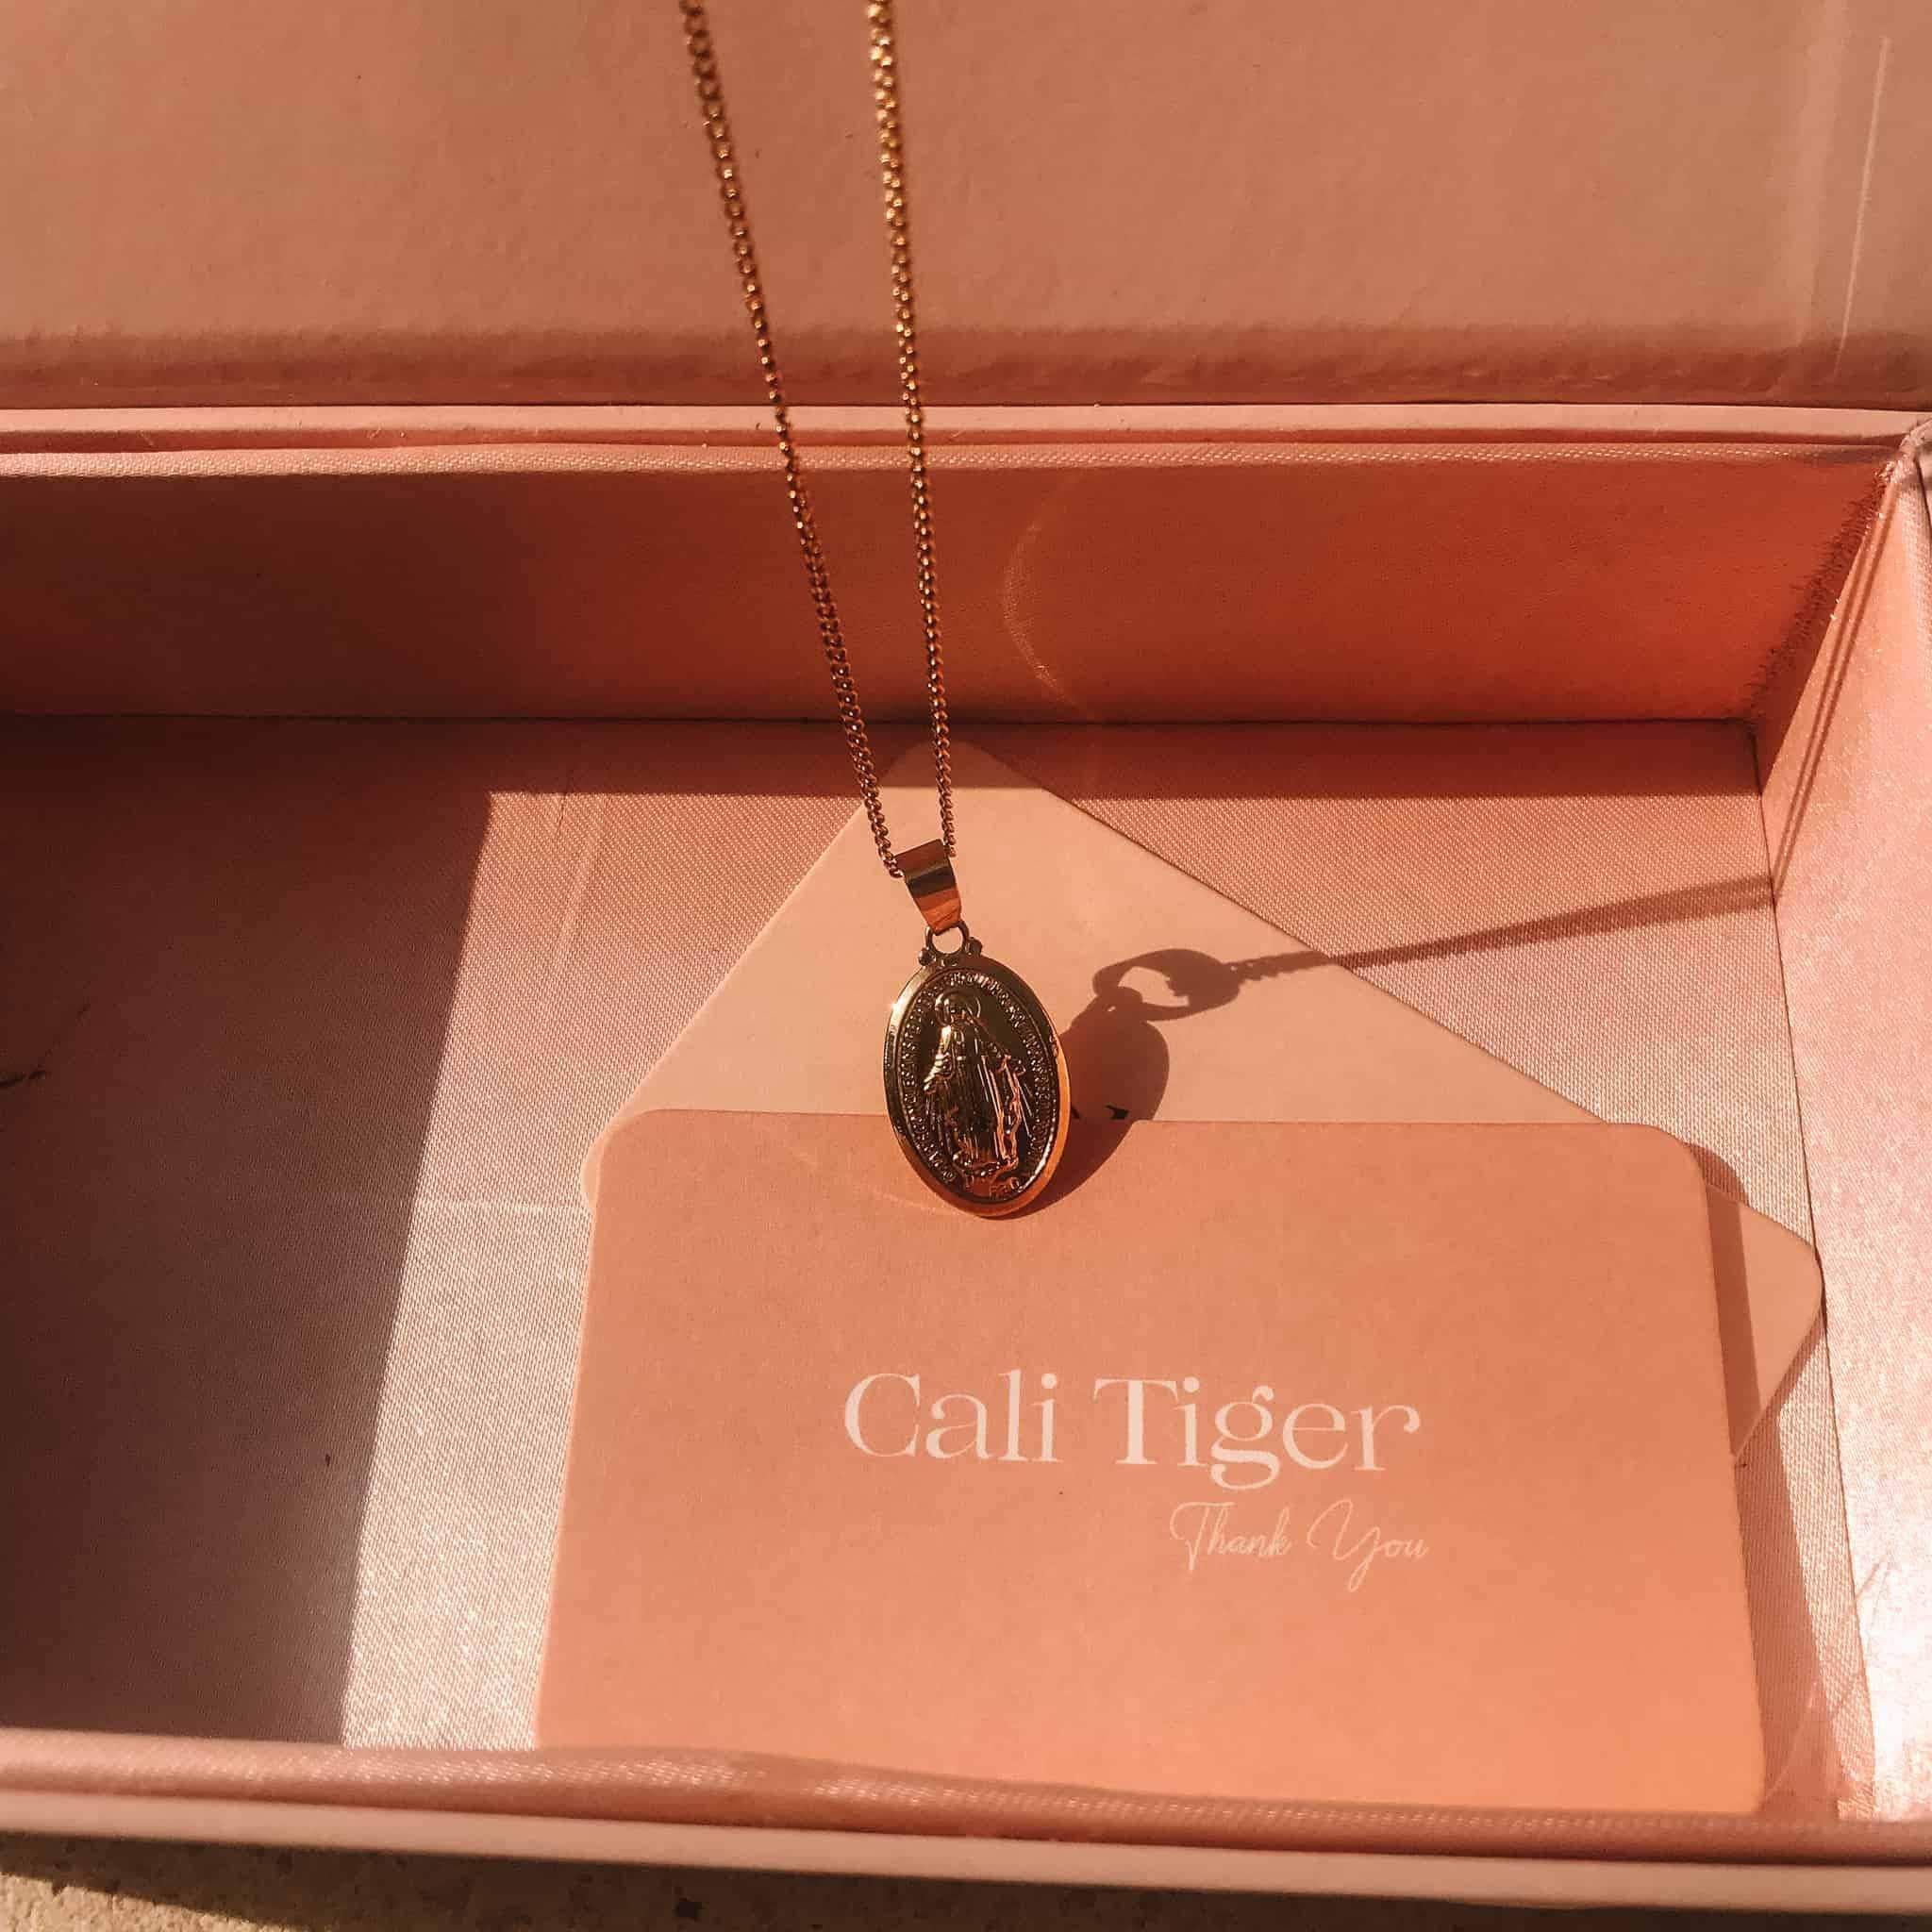 Cali Tiger 'For The Sun Lovers' Box